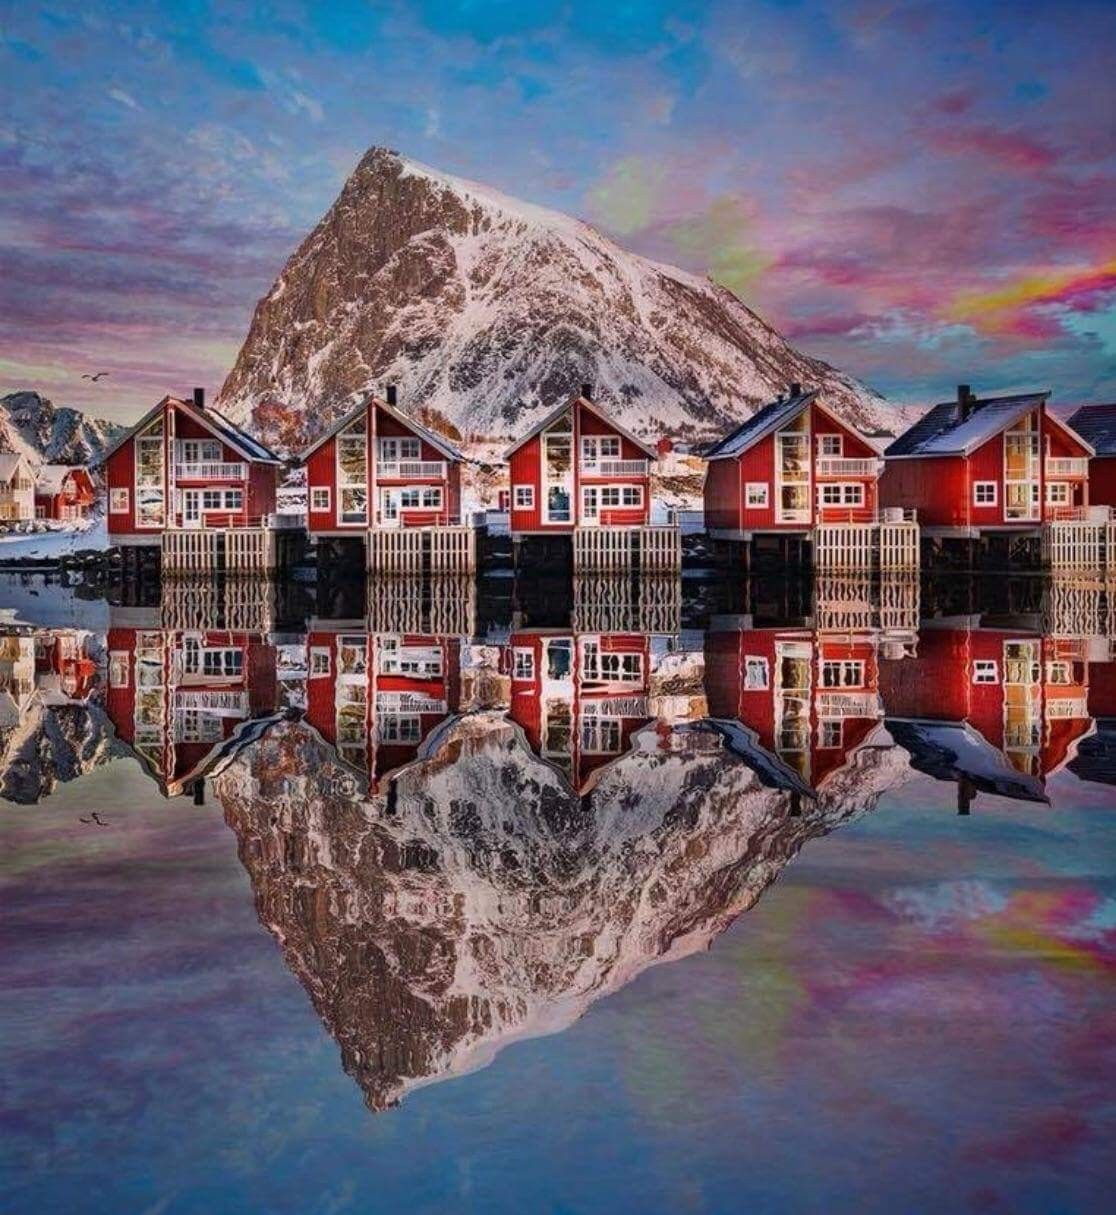 Pin by Hvzyl Galaxy on Travel (With images) | Norway travel, Lofoten ...